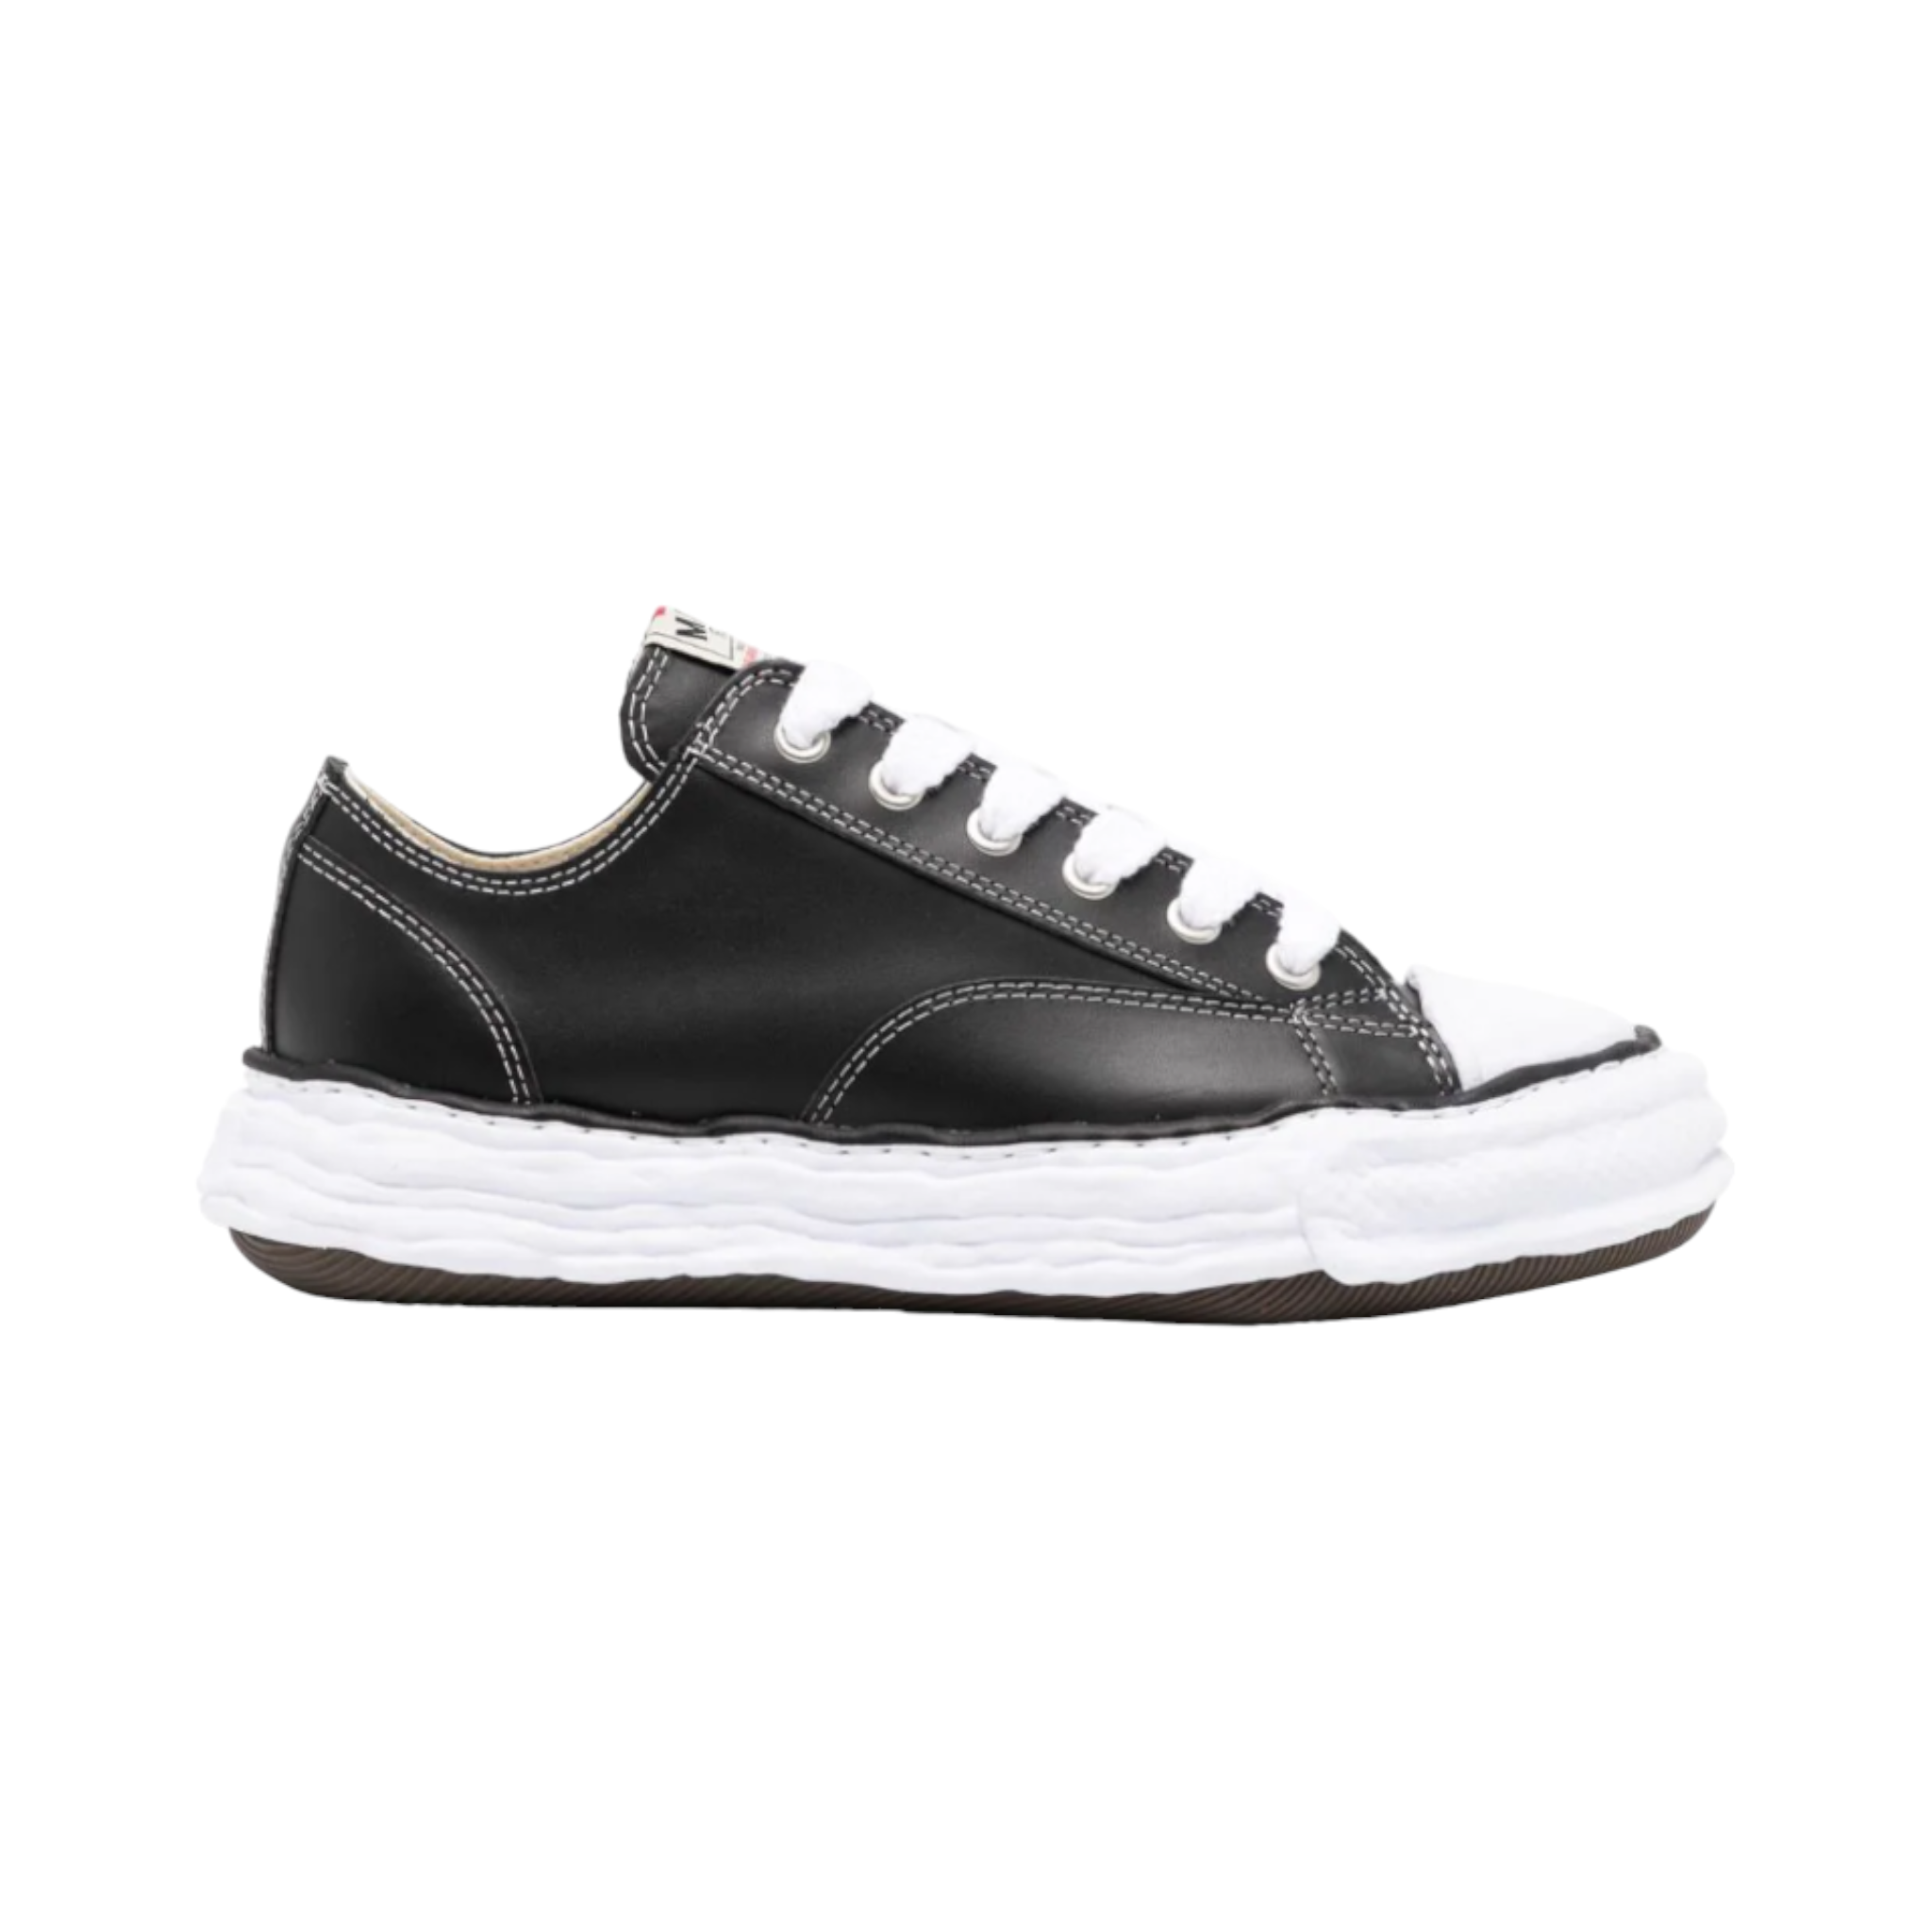 Maison Mihara Yasuhiro Peterson OG Sole Leather Low 'Black' – The Gallery  Boutique